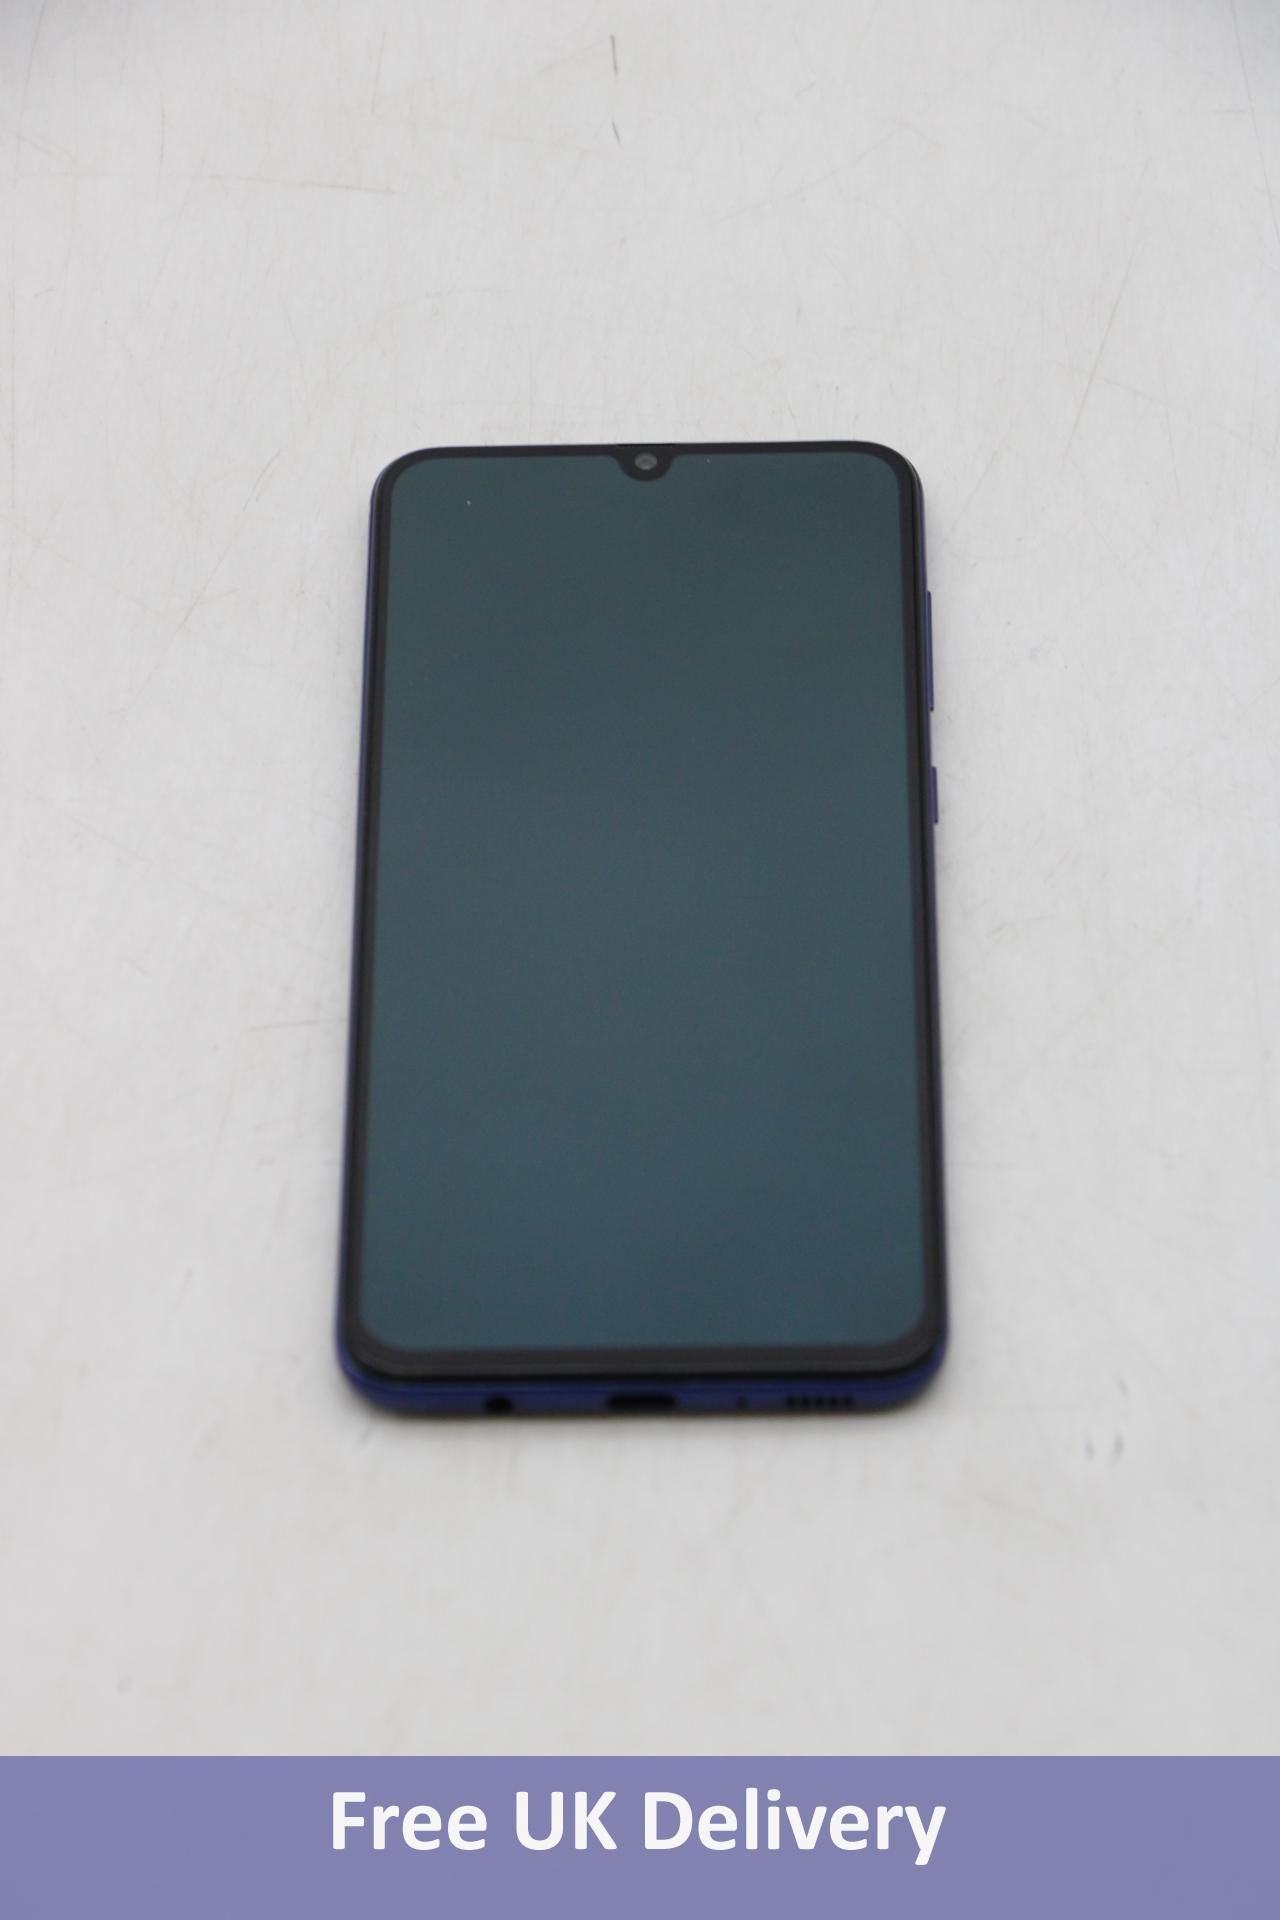 Samsung Galaxy A70 Android Mobile Phone, SM-A705FN/DS 6GB, 128GB, Blue. Used, No box or accessories.